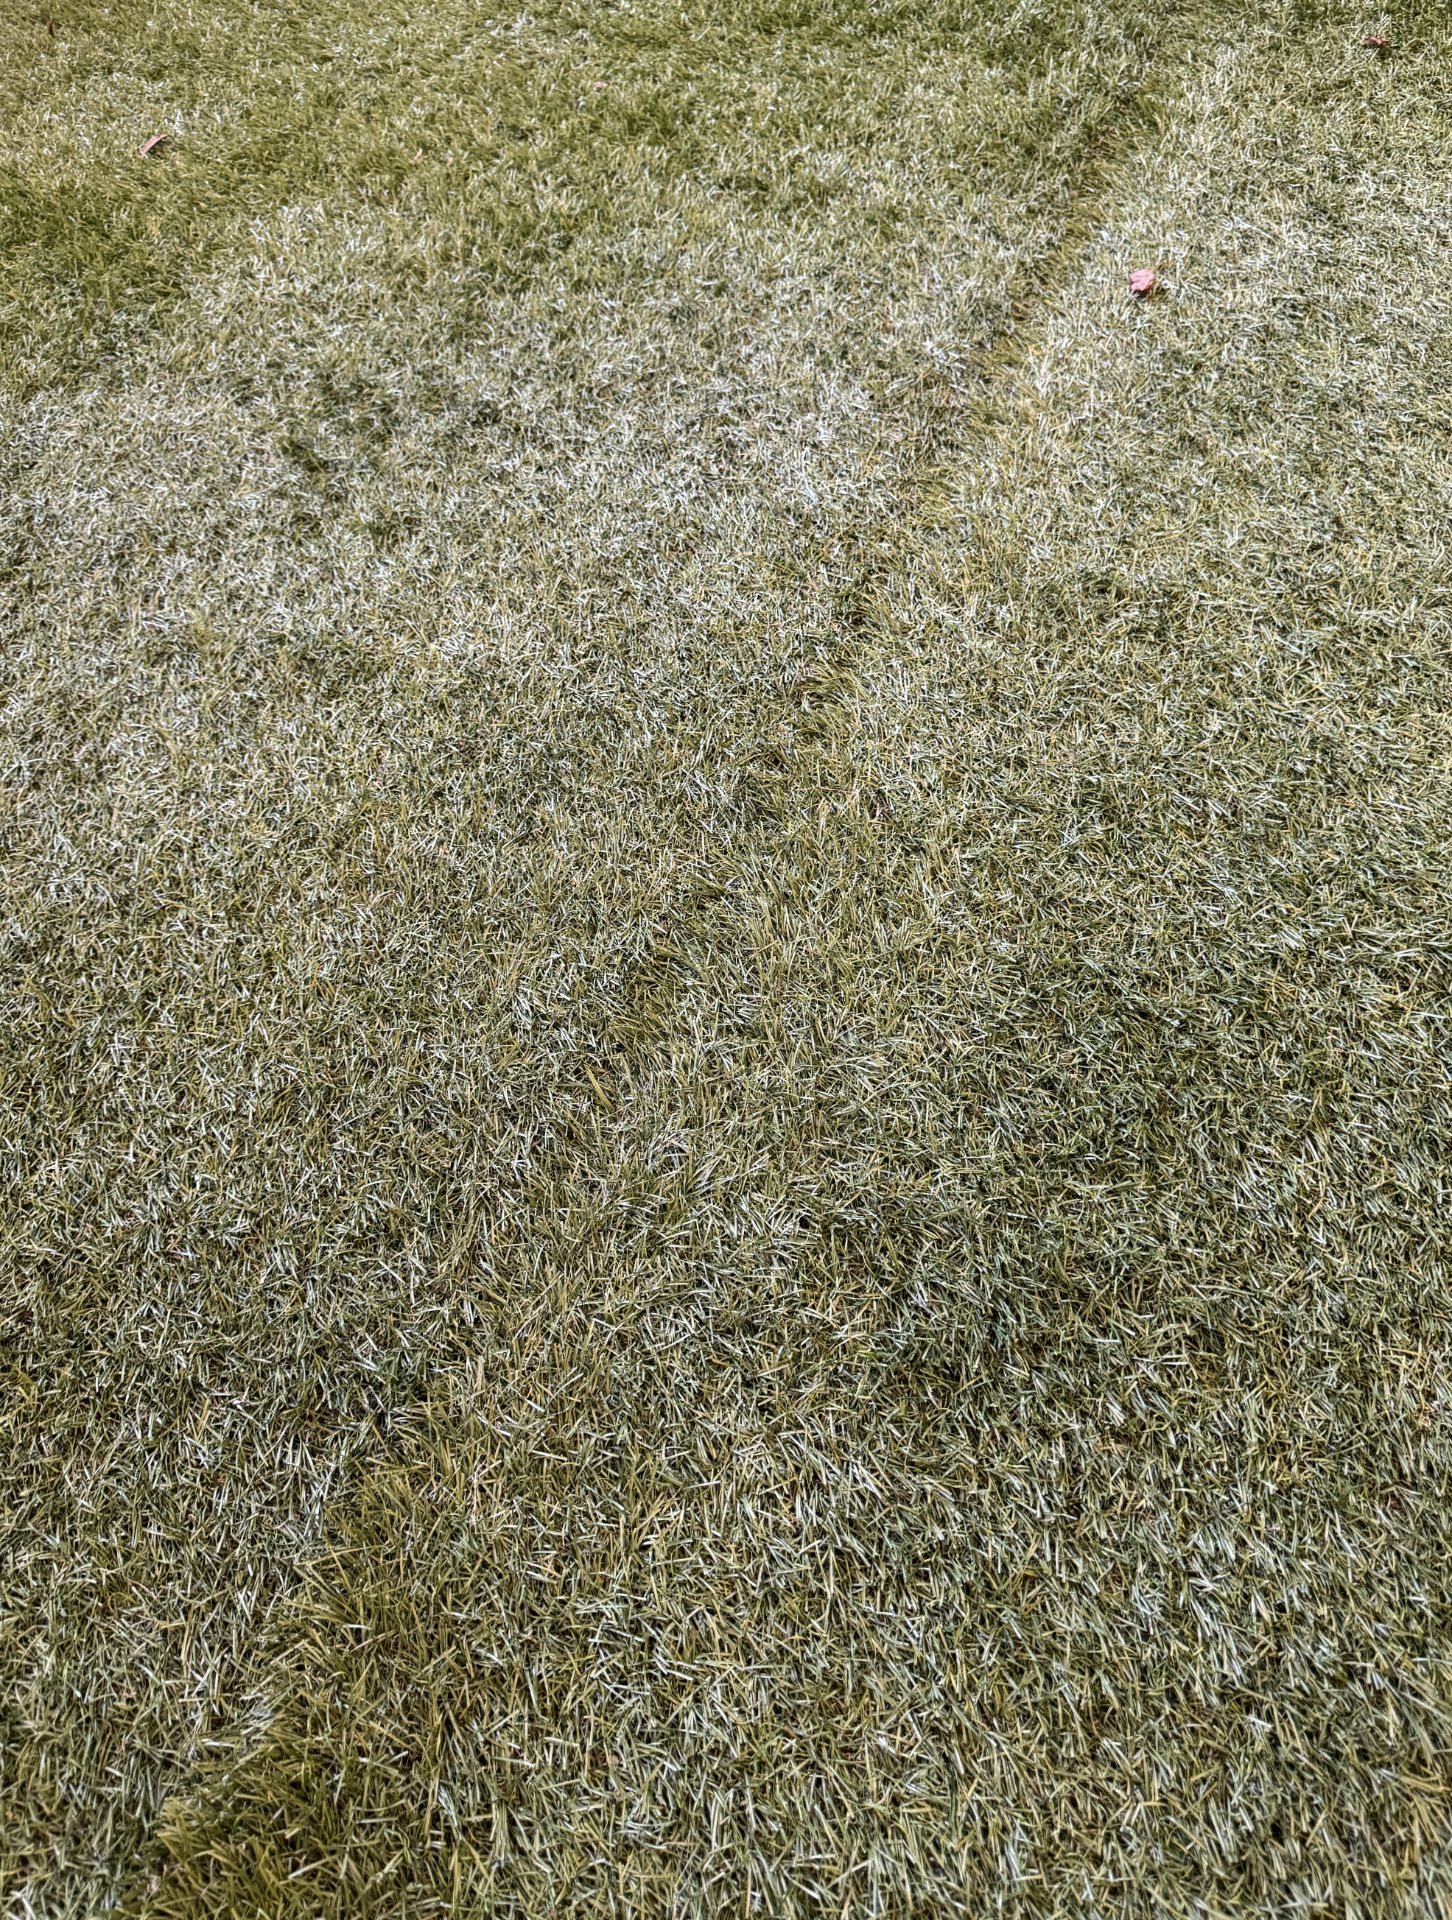 Approximately 150 Square Metre's of Heavy Duty Grade Artificial Grass Advised Laid in Rolls of Uncut - Image 15 of 23